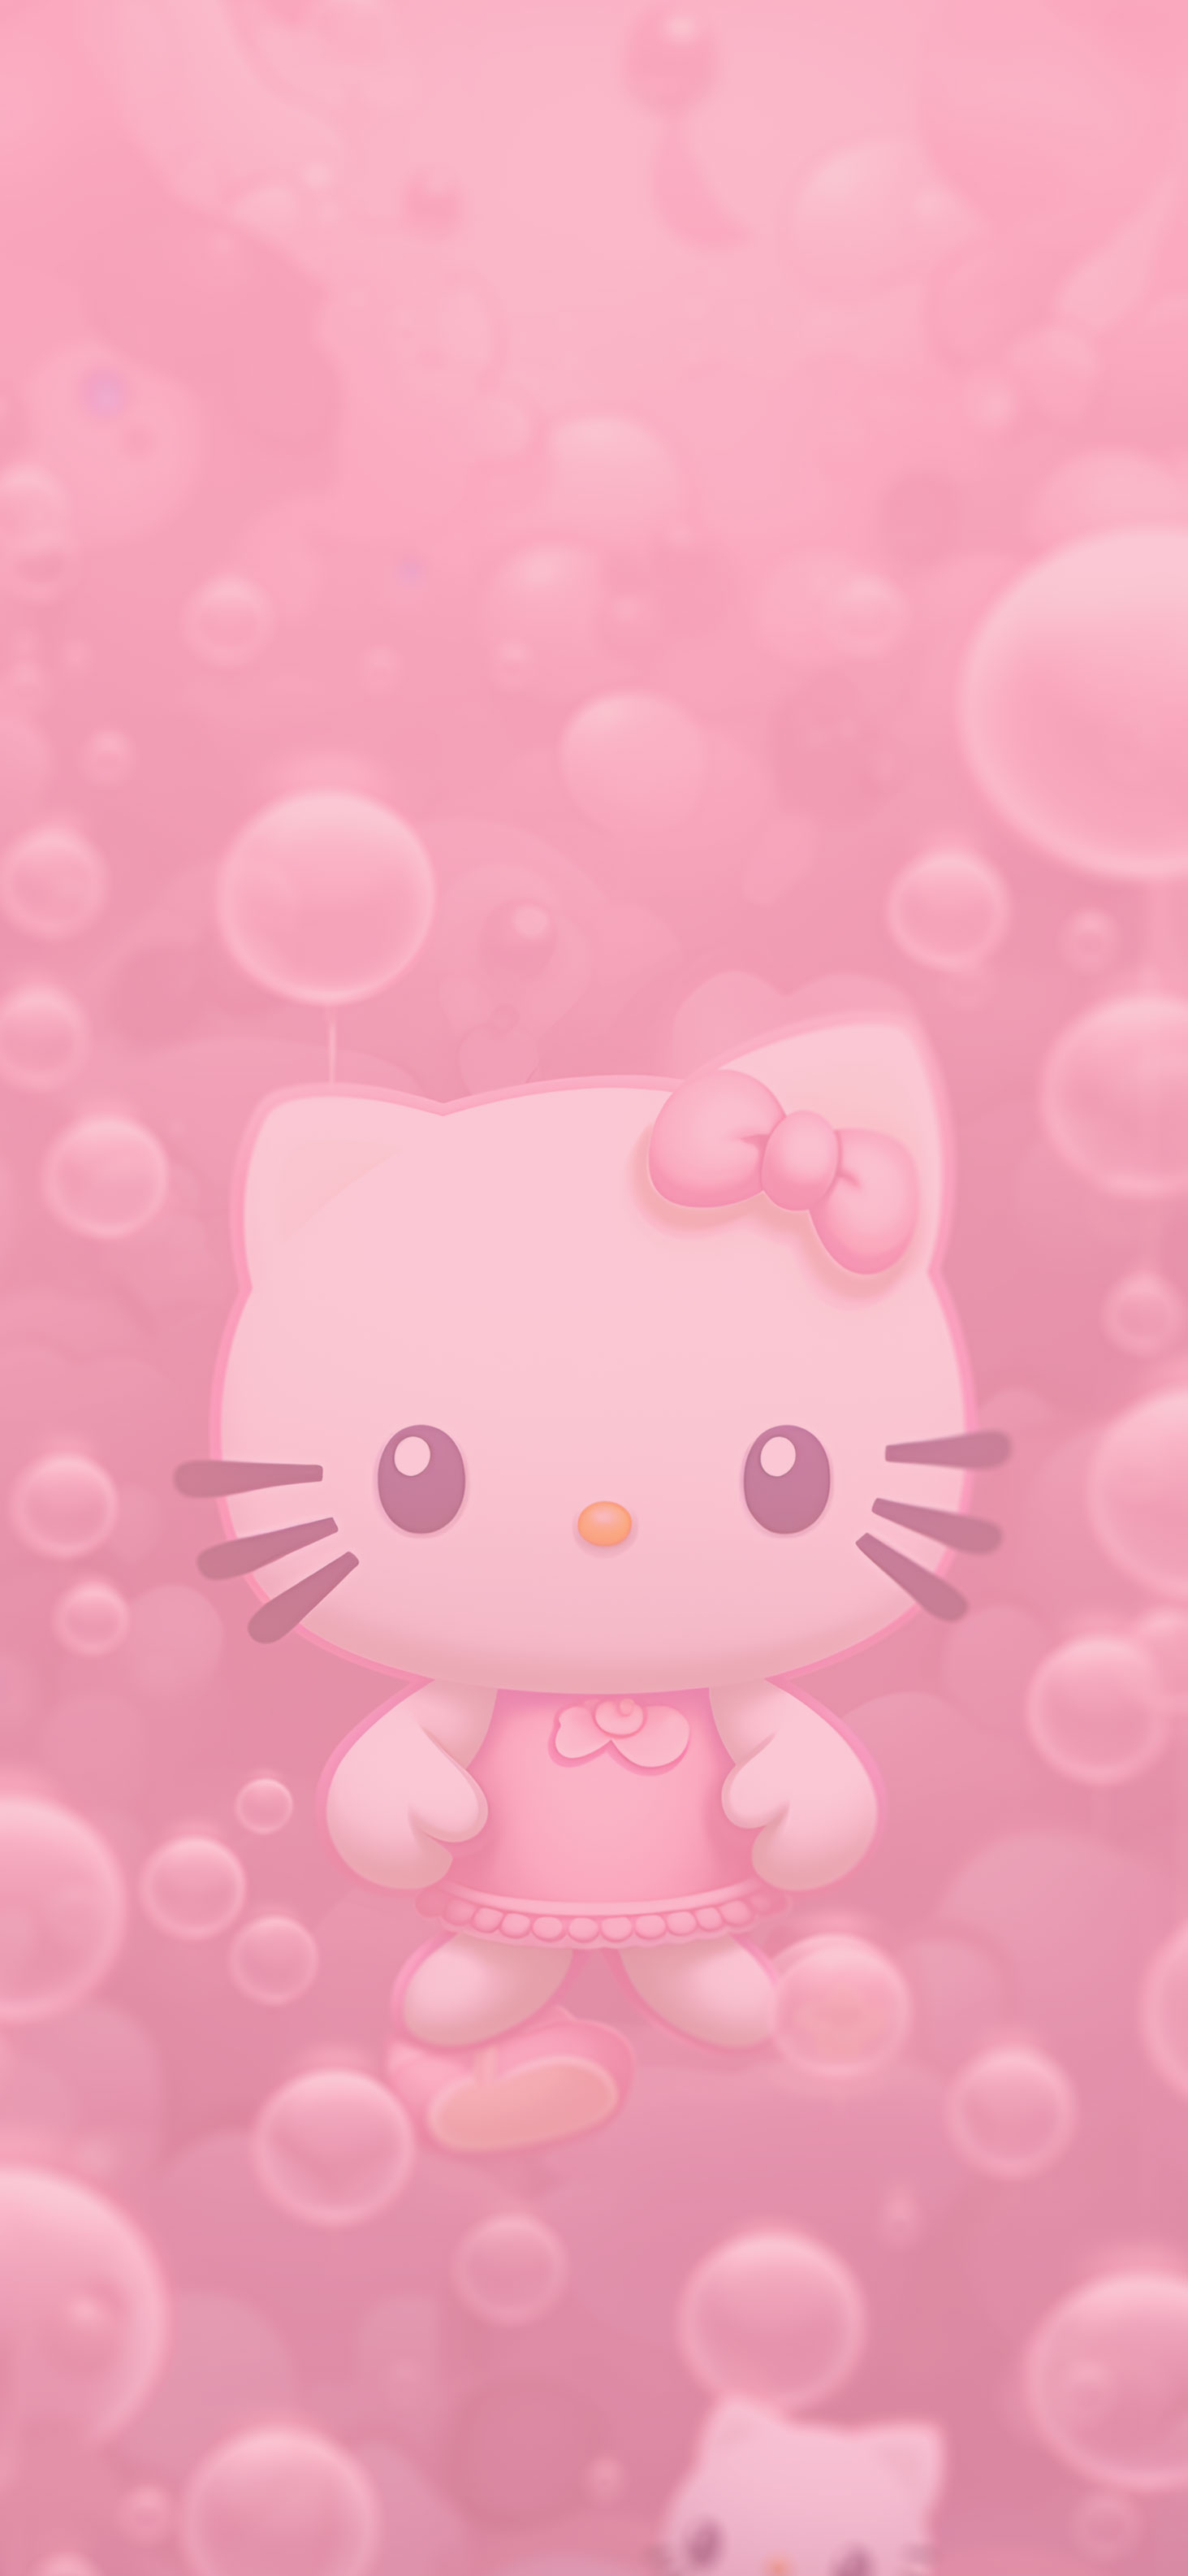 100 Free Hello Kitty HD Wallpapers & Backgrounds - MrWallpaper.com